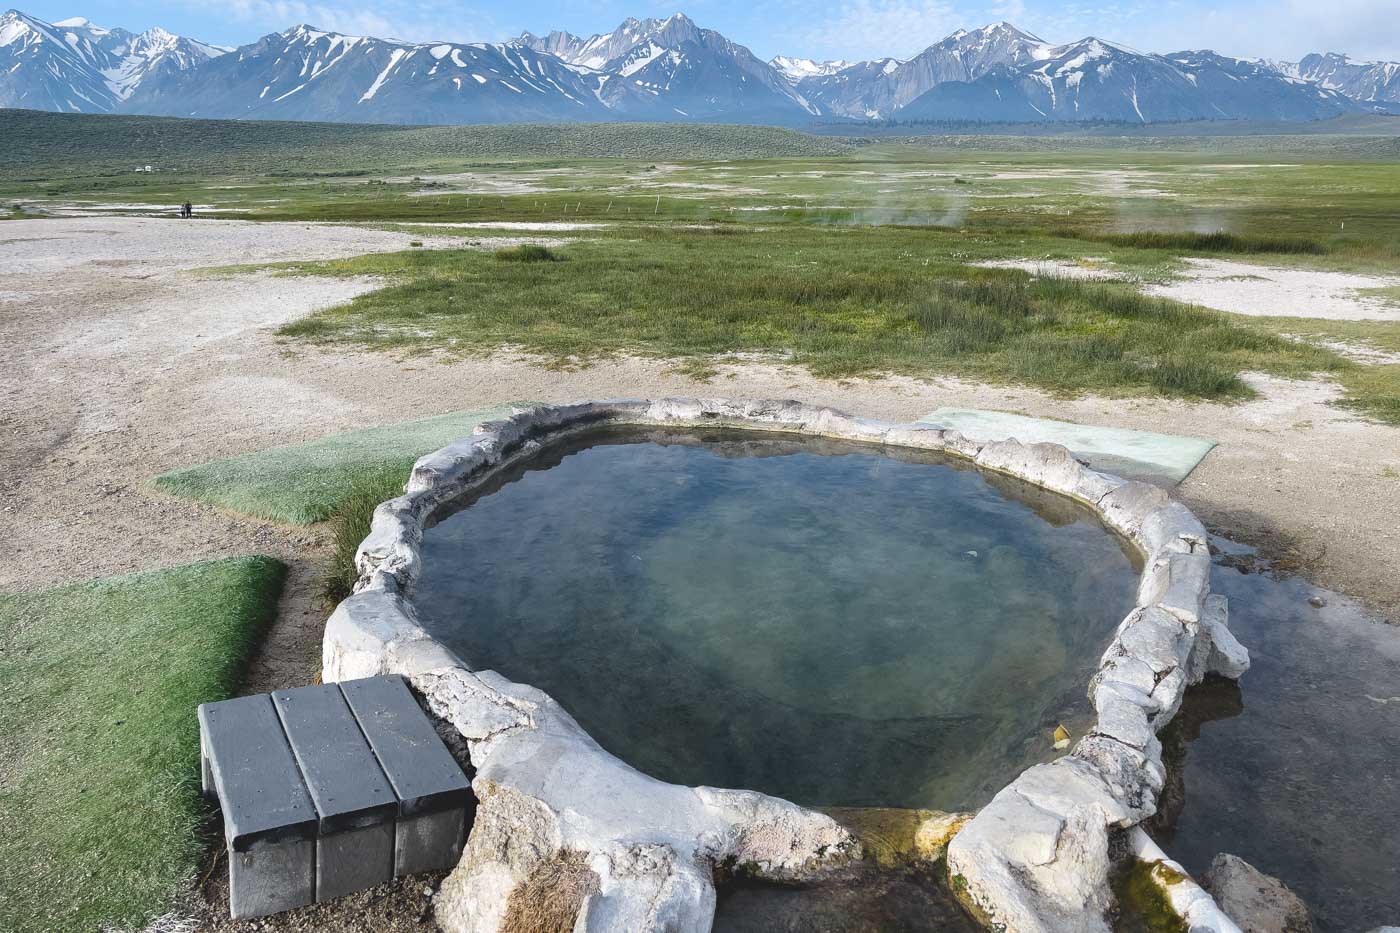 A step into Hilltop Hot Spring with a view over a field and the Sierra Nevada mountain range.